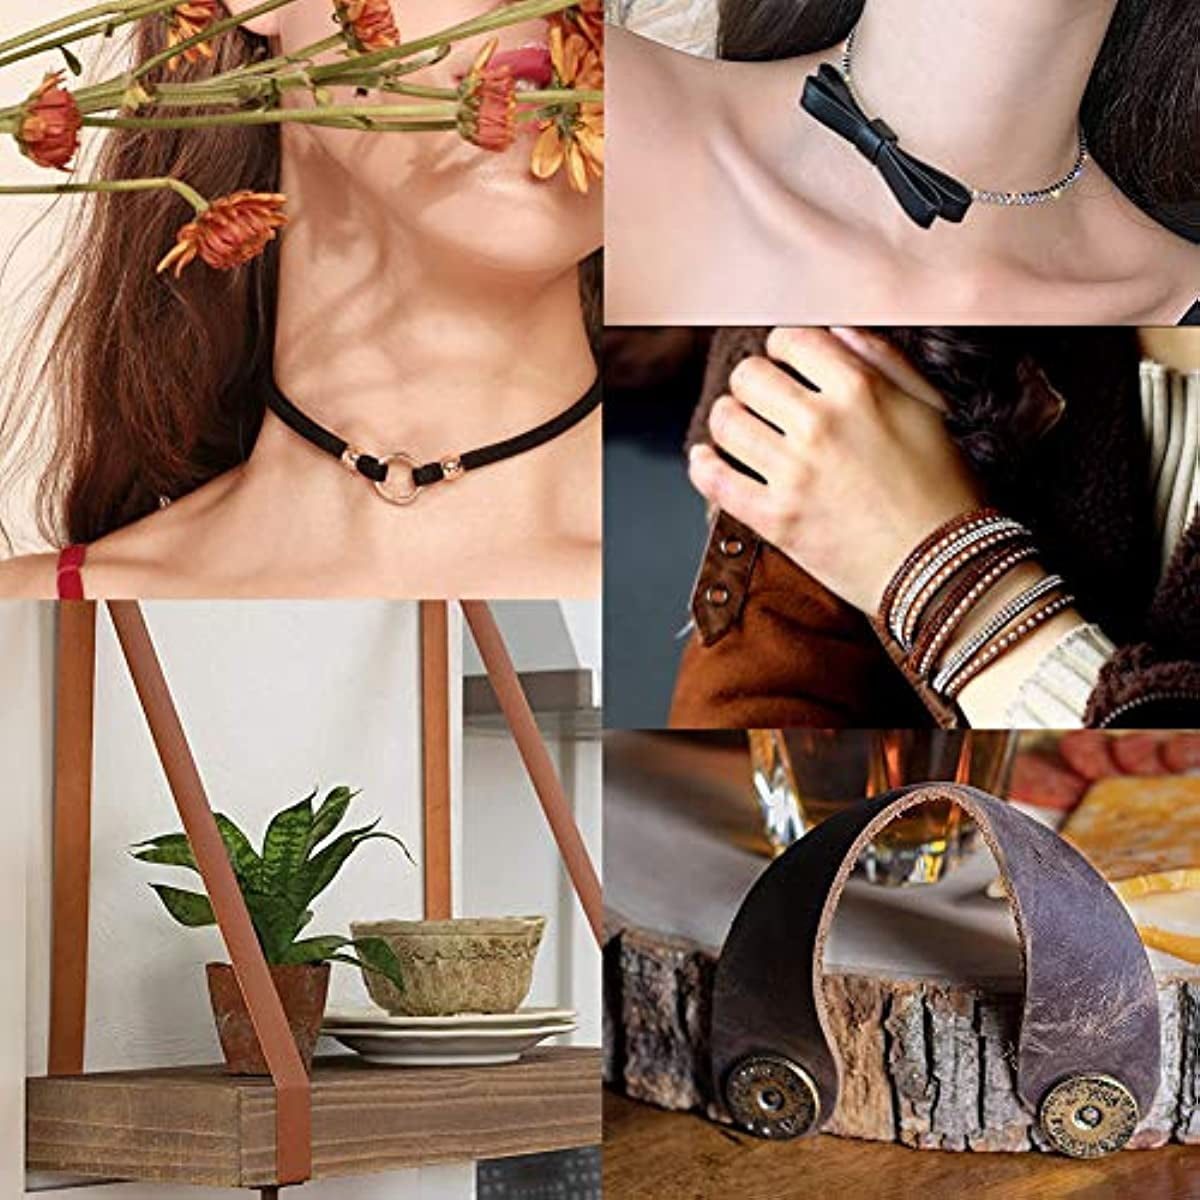 KJHBV 1 Roll Leather Roll DIY Leather Strap Leather Wrap Flat Cord Leather  Strips for DIY Crafts Making Crafting Leather Material Leather Strip Straps